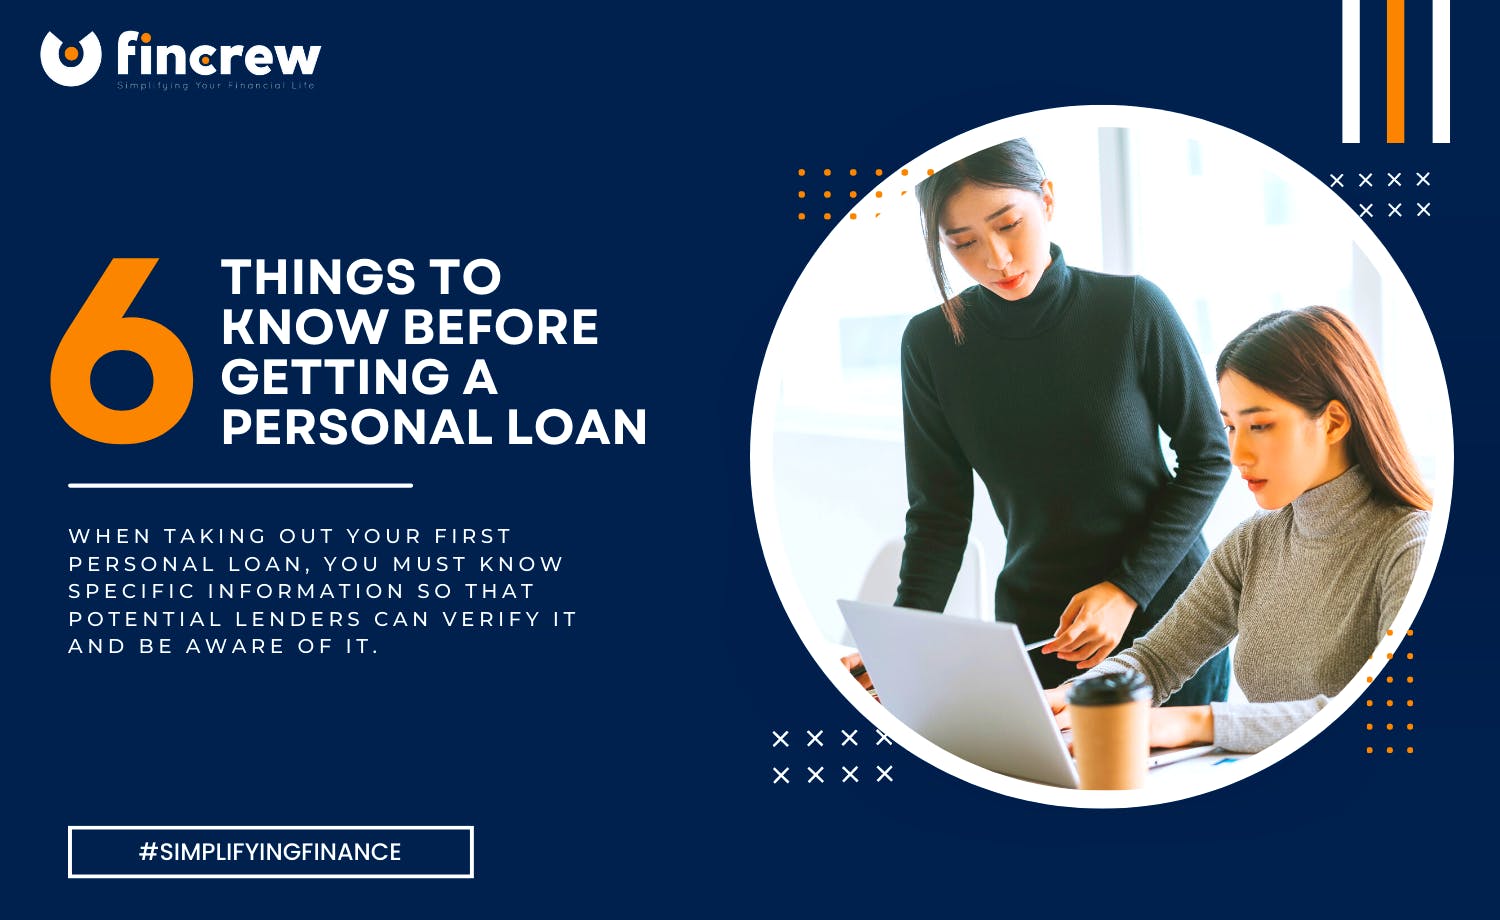 Six (6) Things To Know Before Getting a Personal Loan